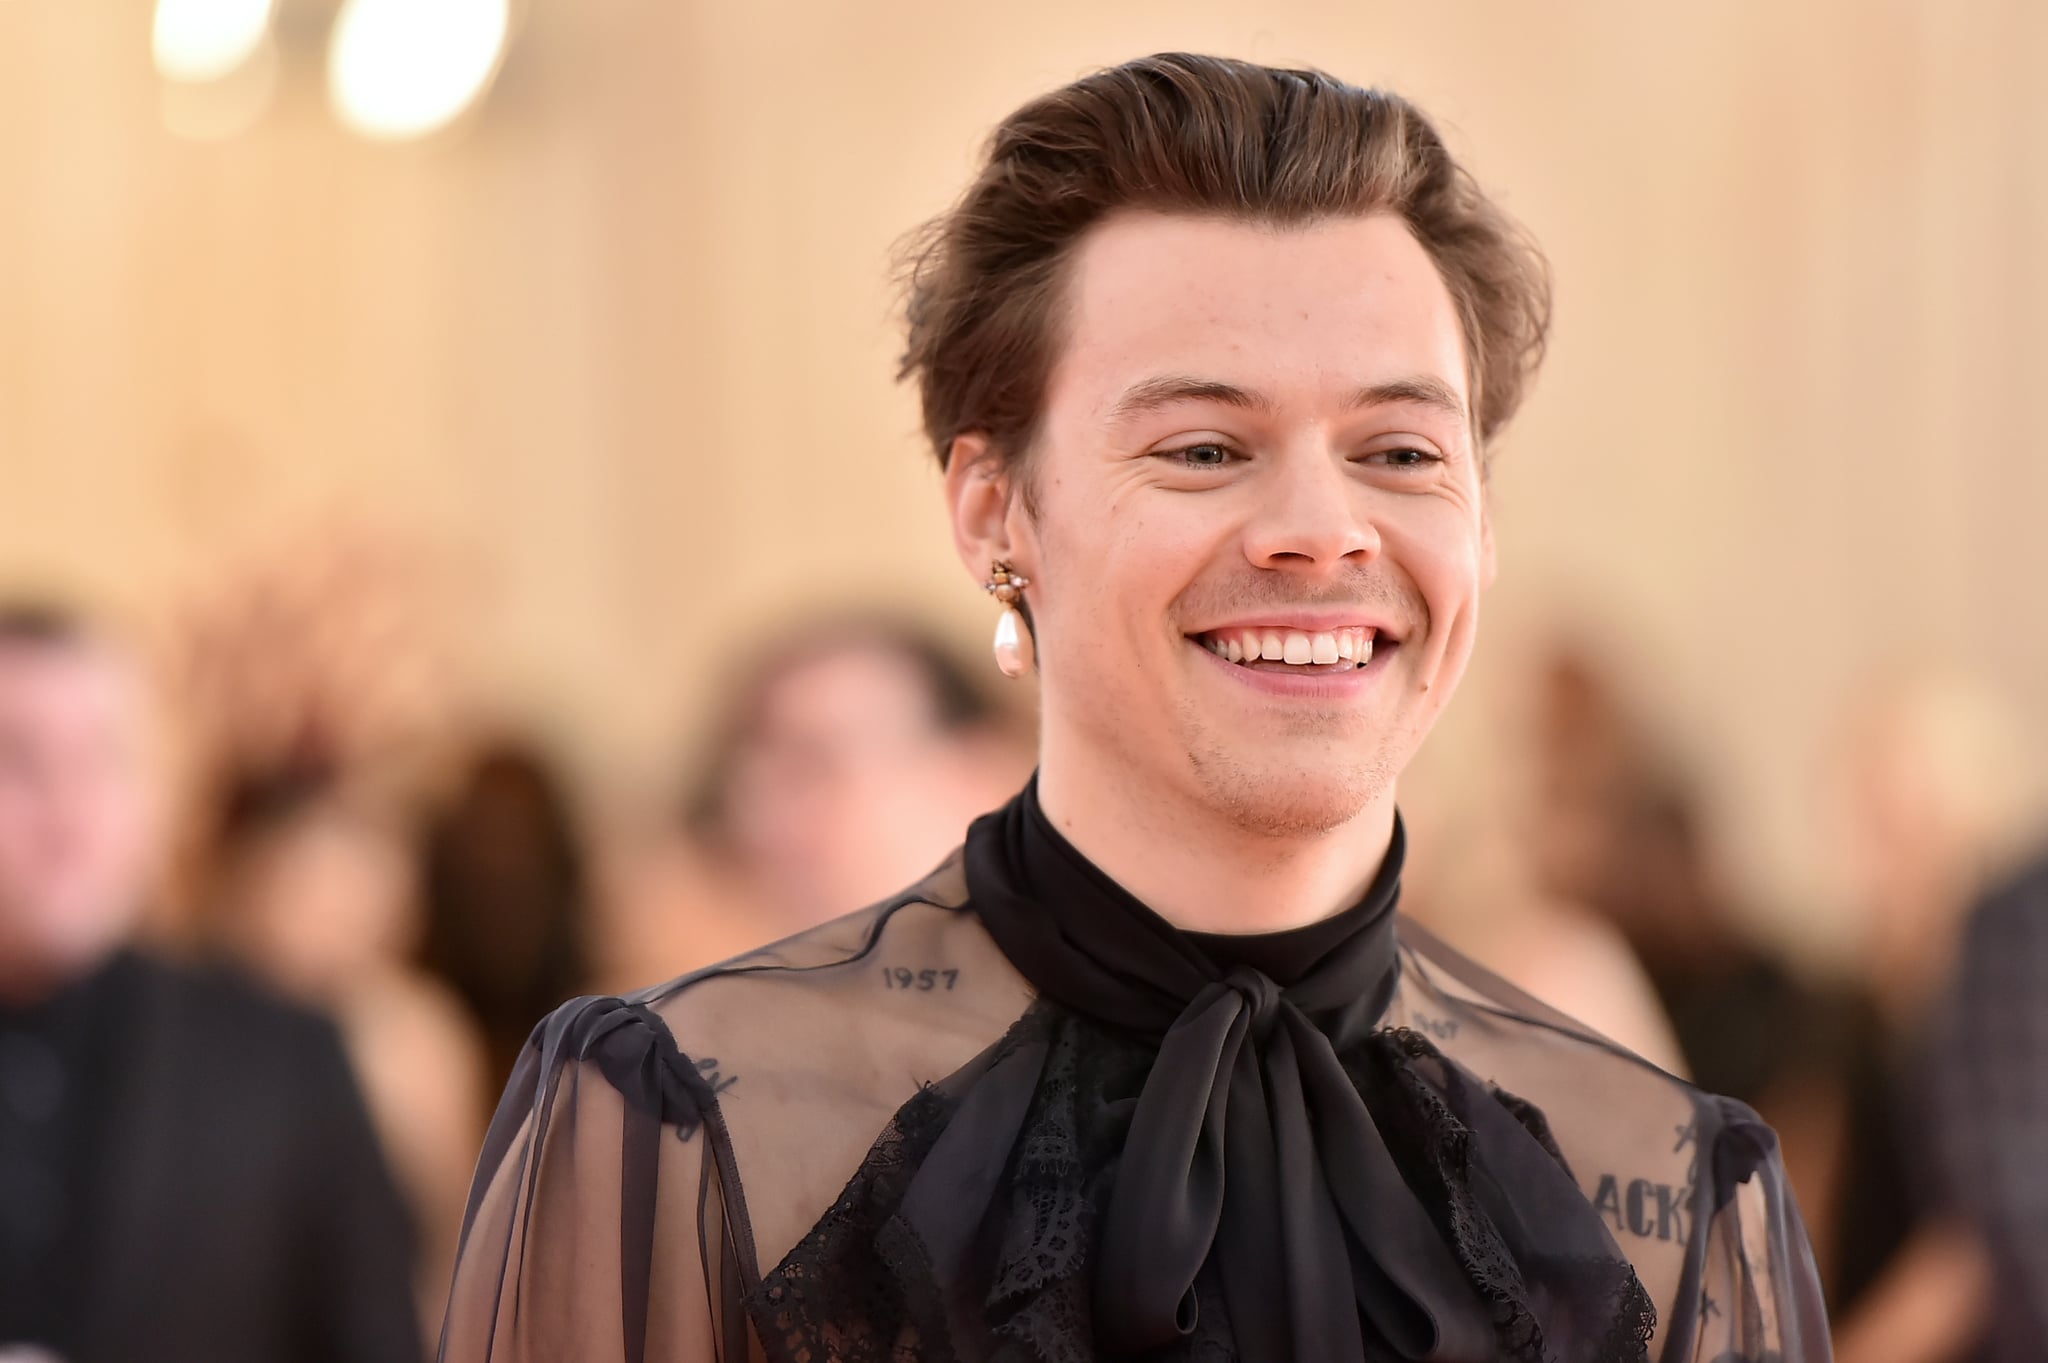 Harry Styles is recording a sleep story with the sleep and relaxation app Calm, dropping July 8.
Continue reading on POPSUGAR Health and Fitness Aust